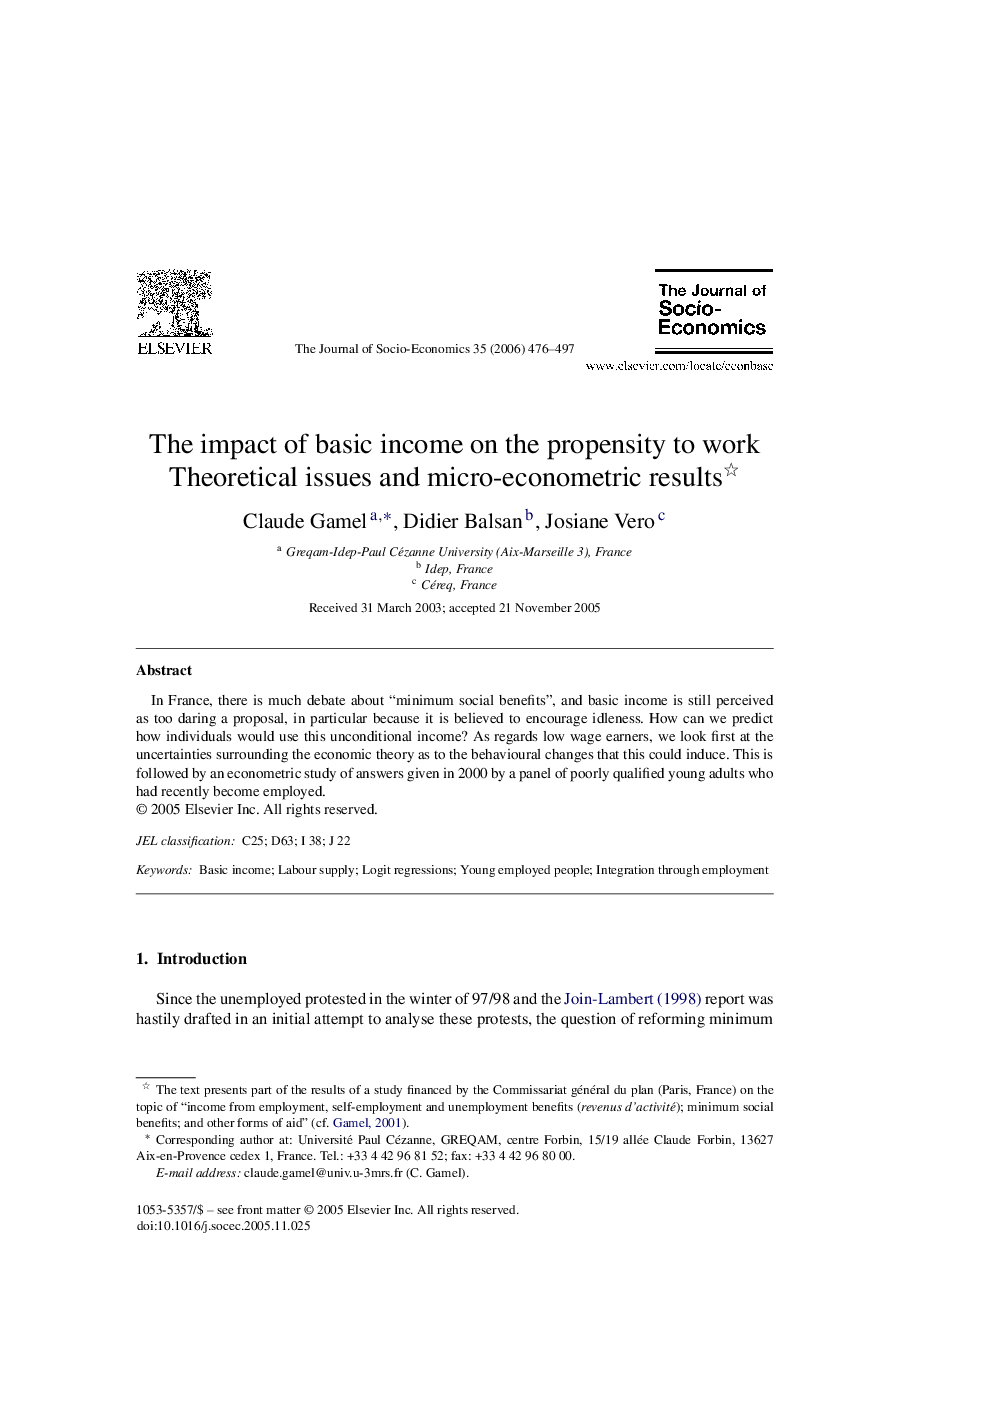 The impact of basic income on the propensity to work : Theoretical issues and micro-econometric results